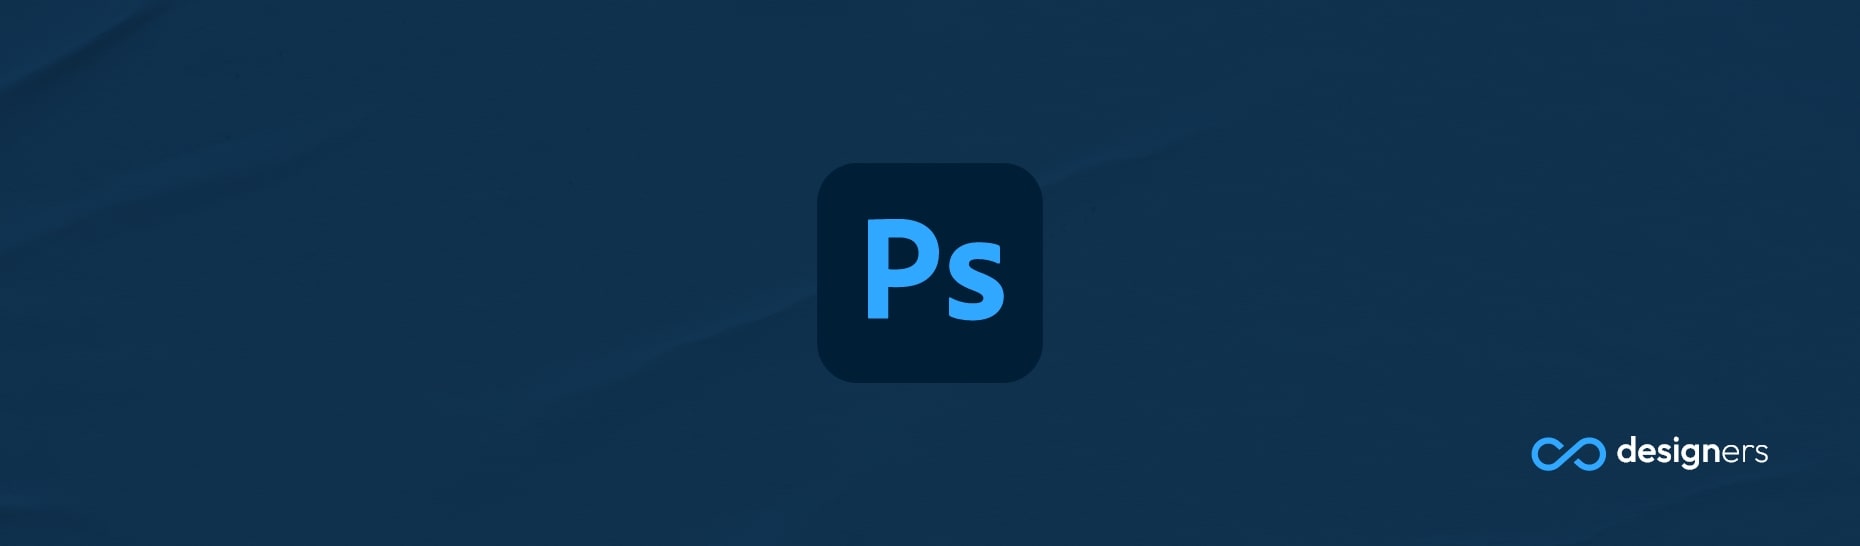 How Do I Save as Mp4 in Photoshop?